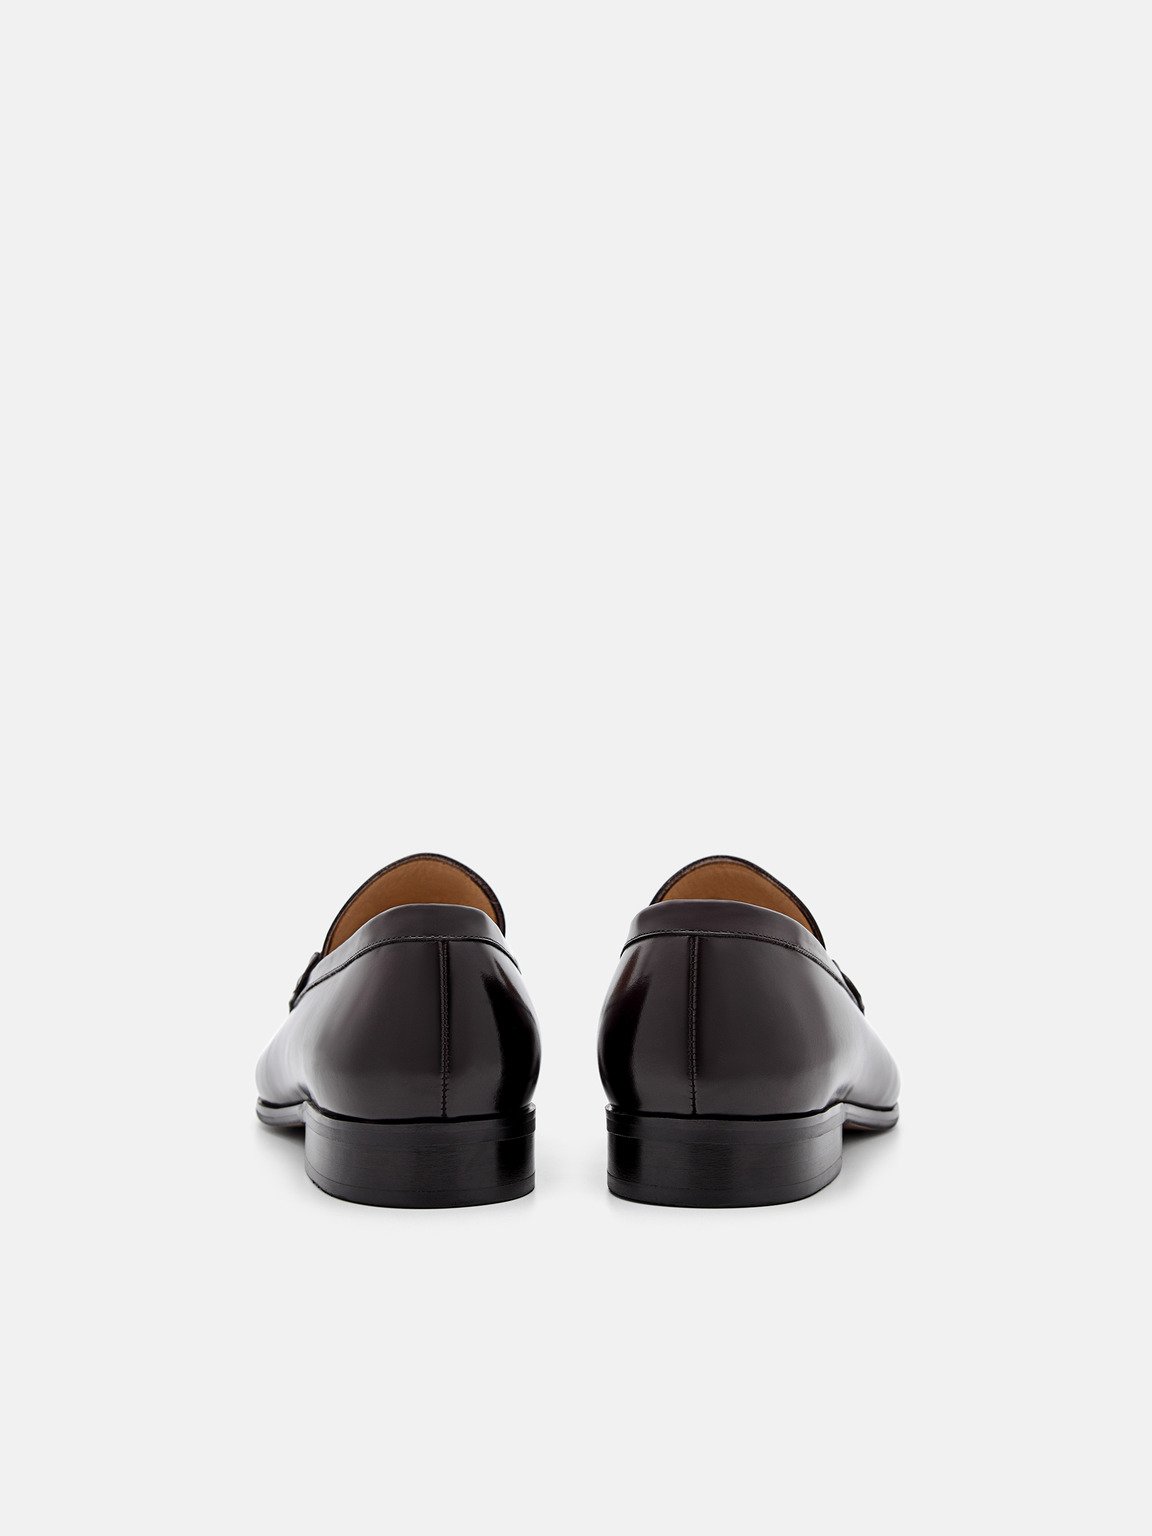 Leather Buckle Loafers, Dark Brown